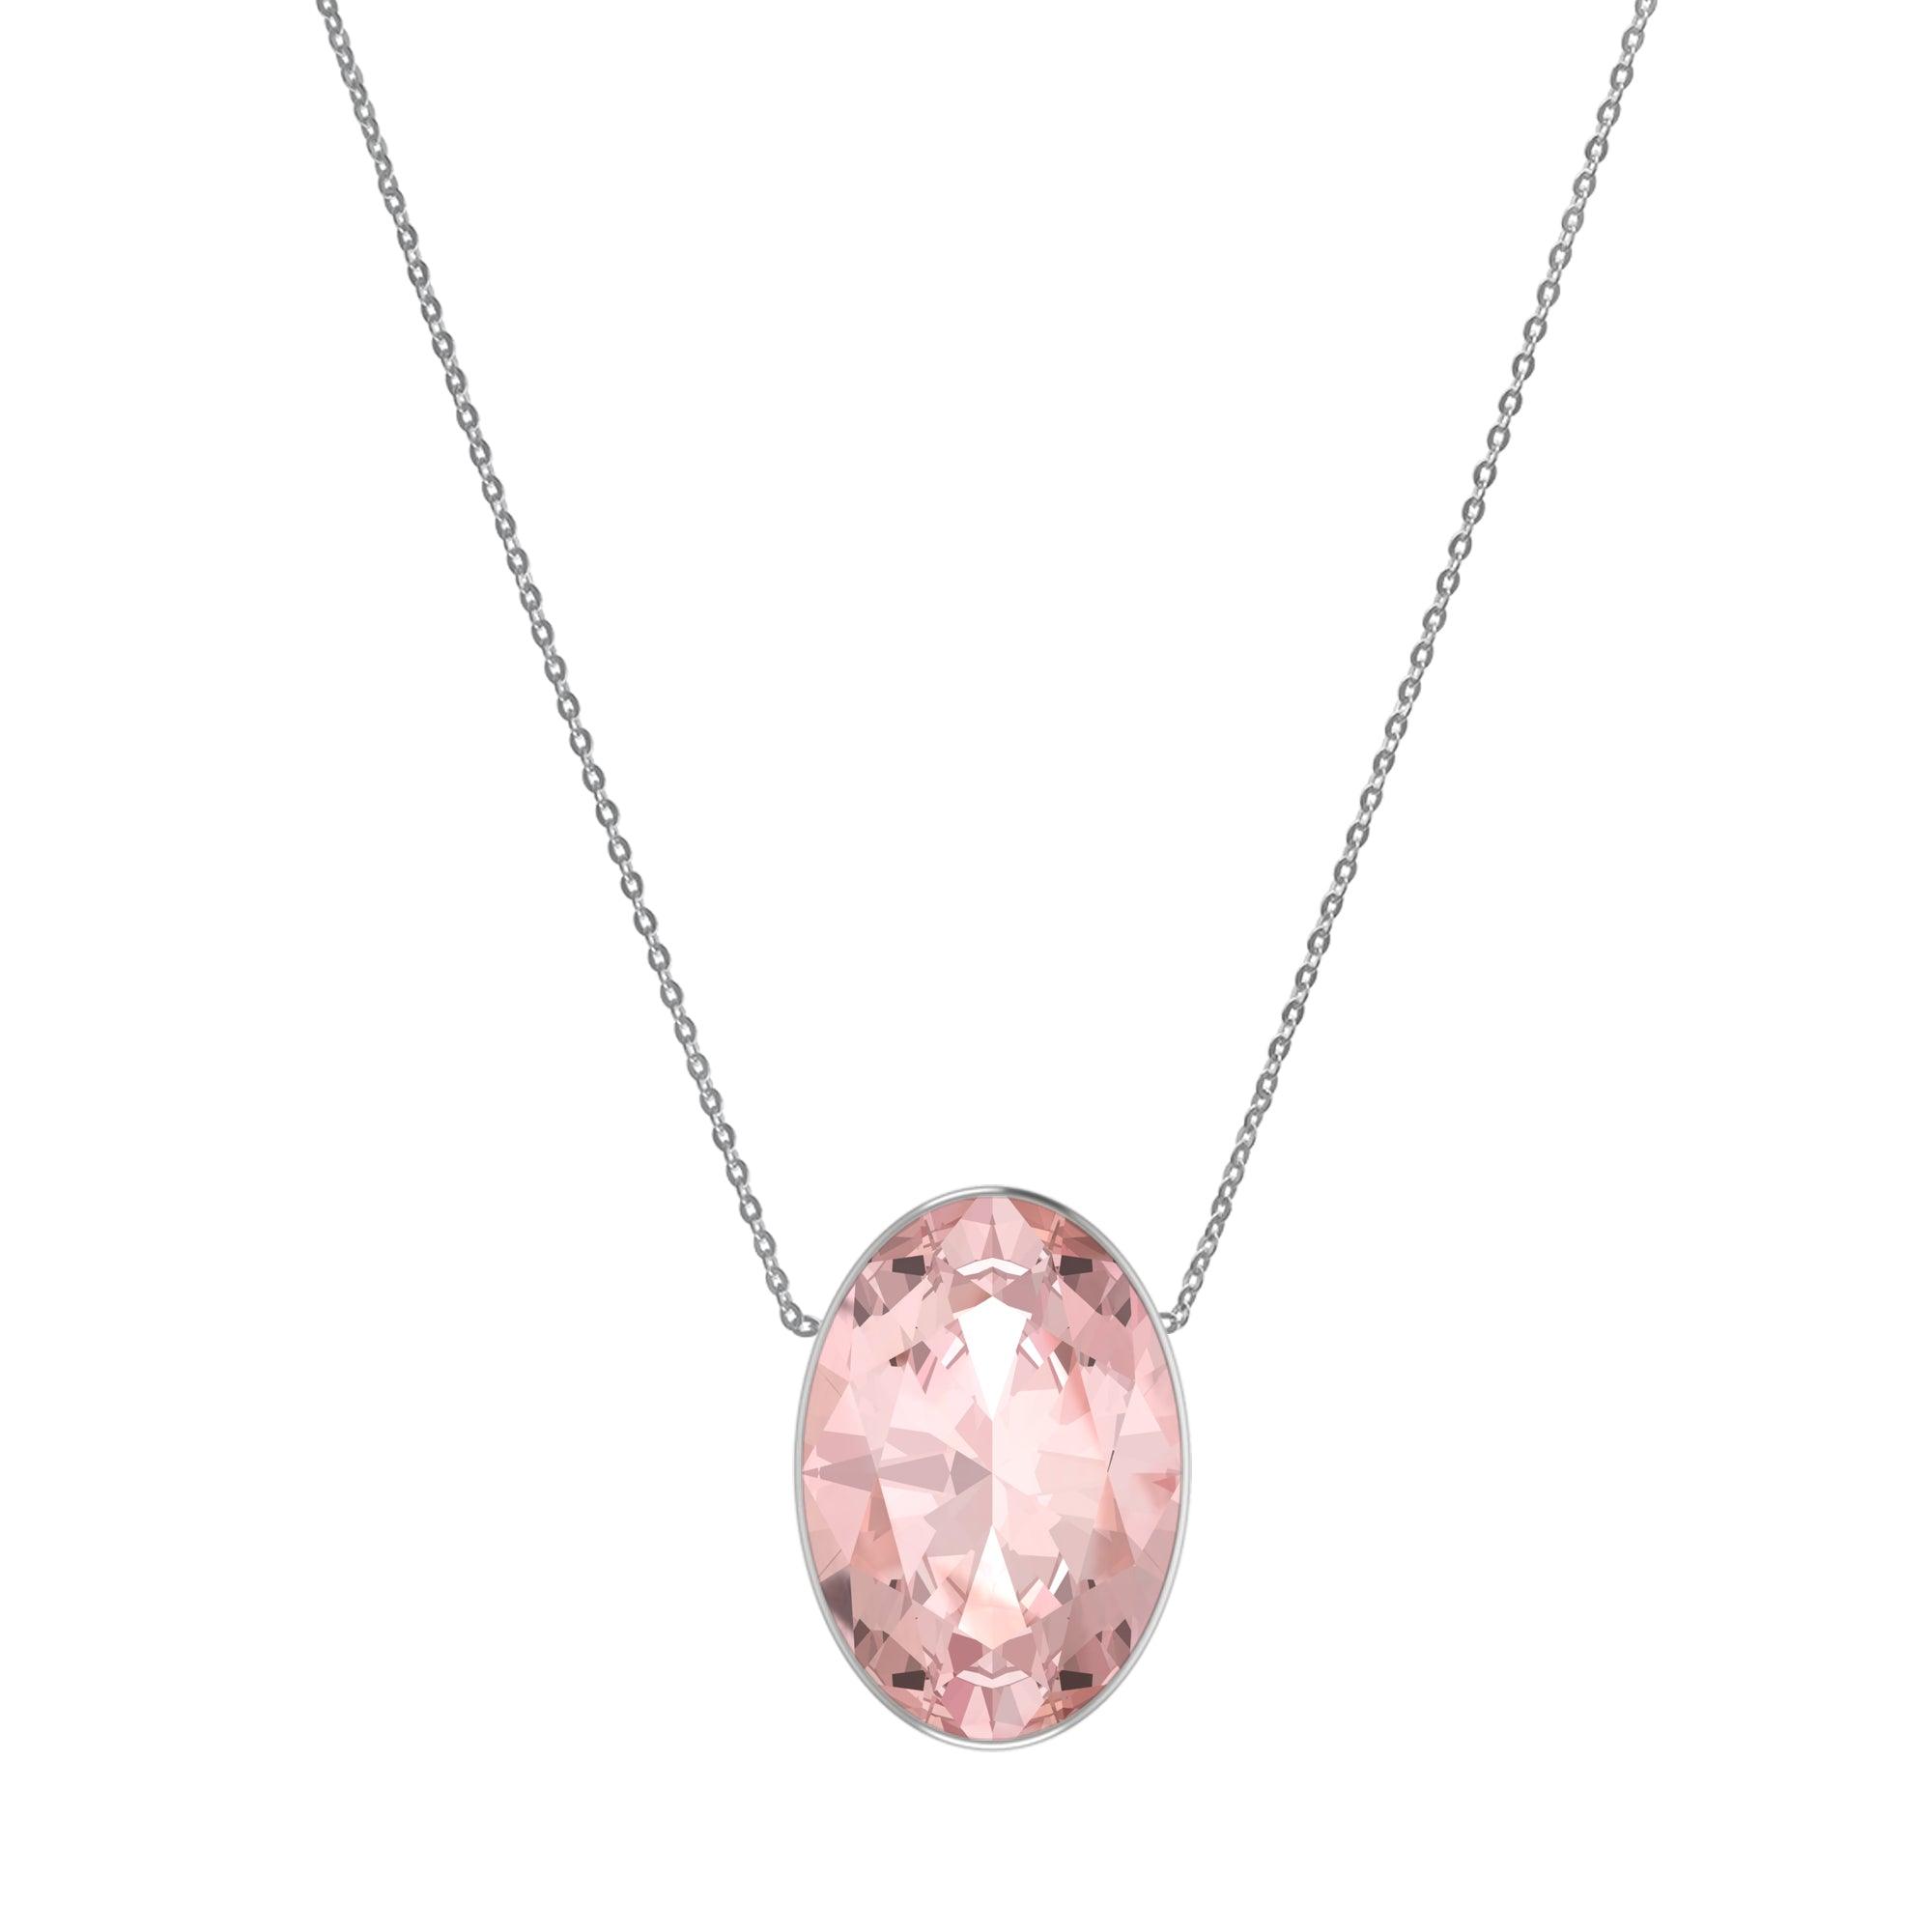 925 Sterling Silver Cut Morganite Slider Necklace With Chain 18" Bezel Set Jewelry Pack of 6